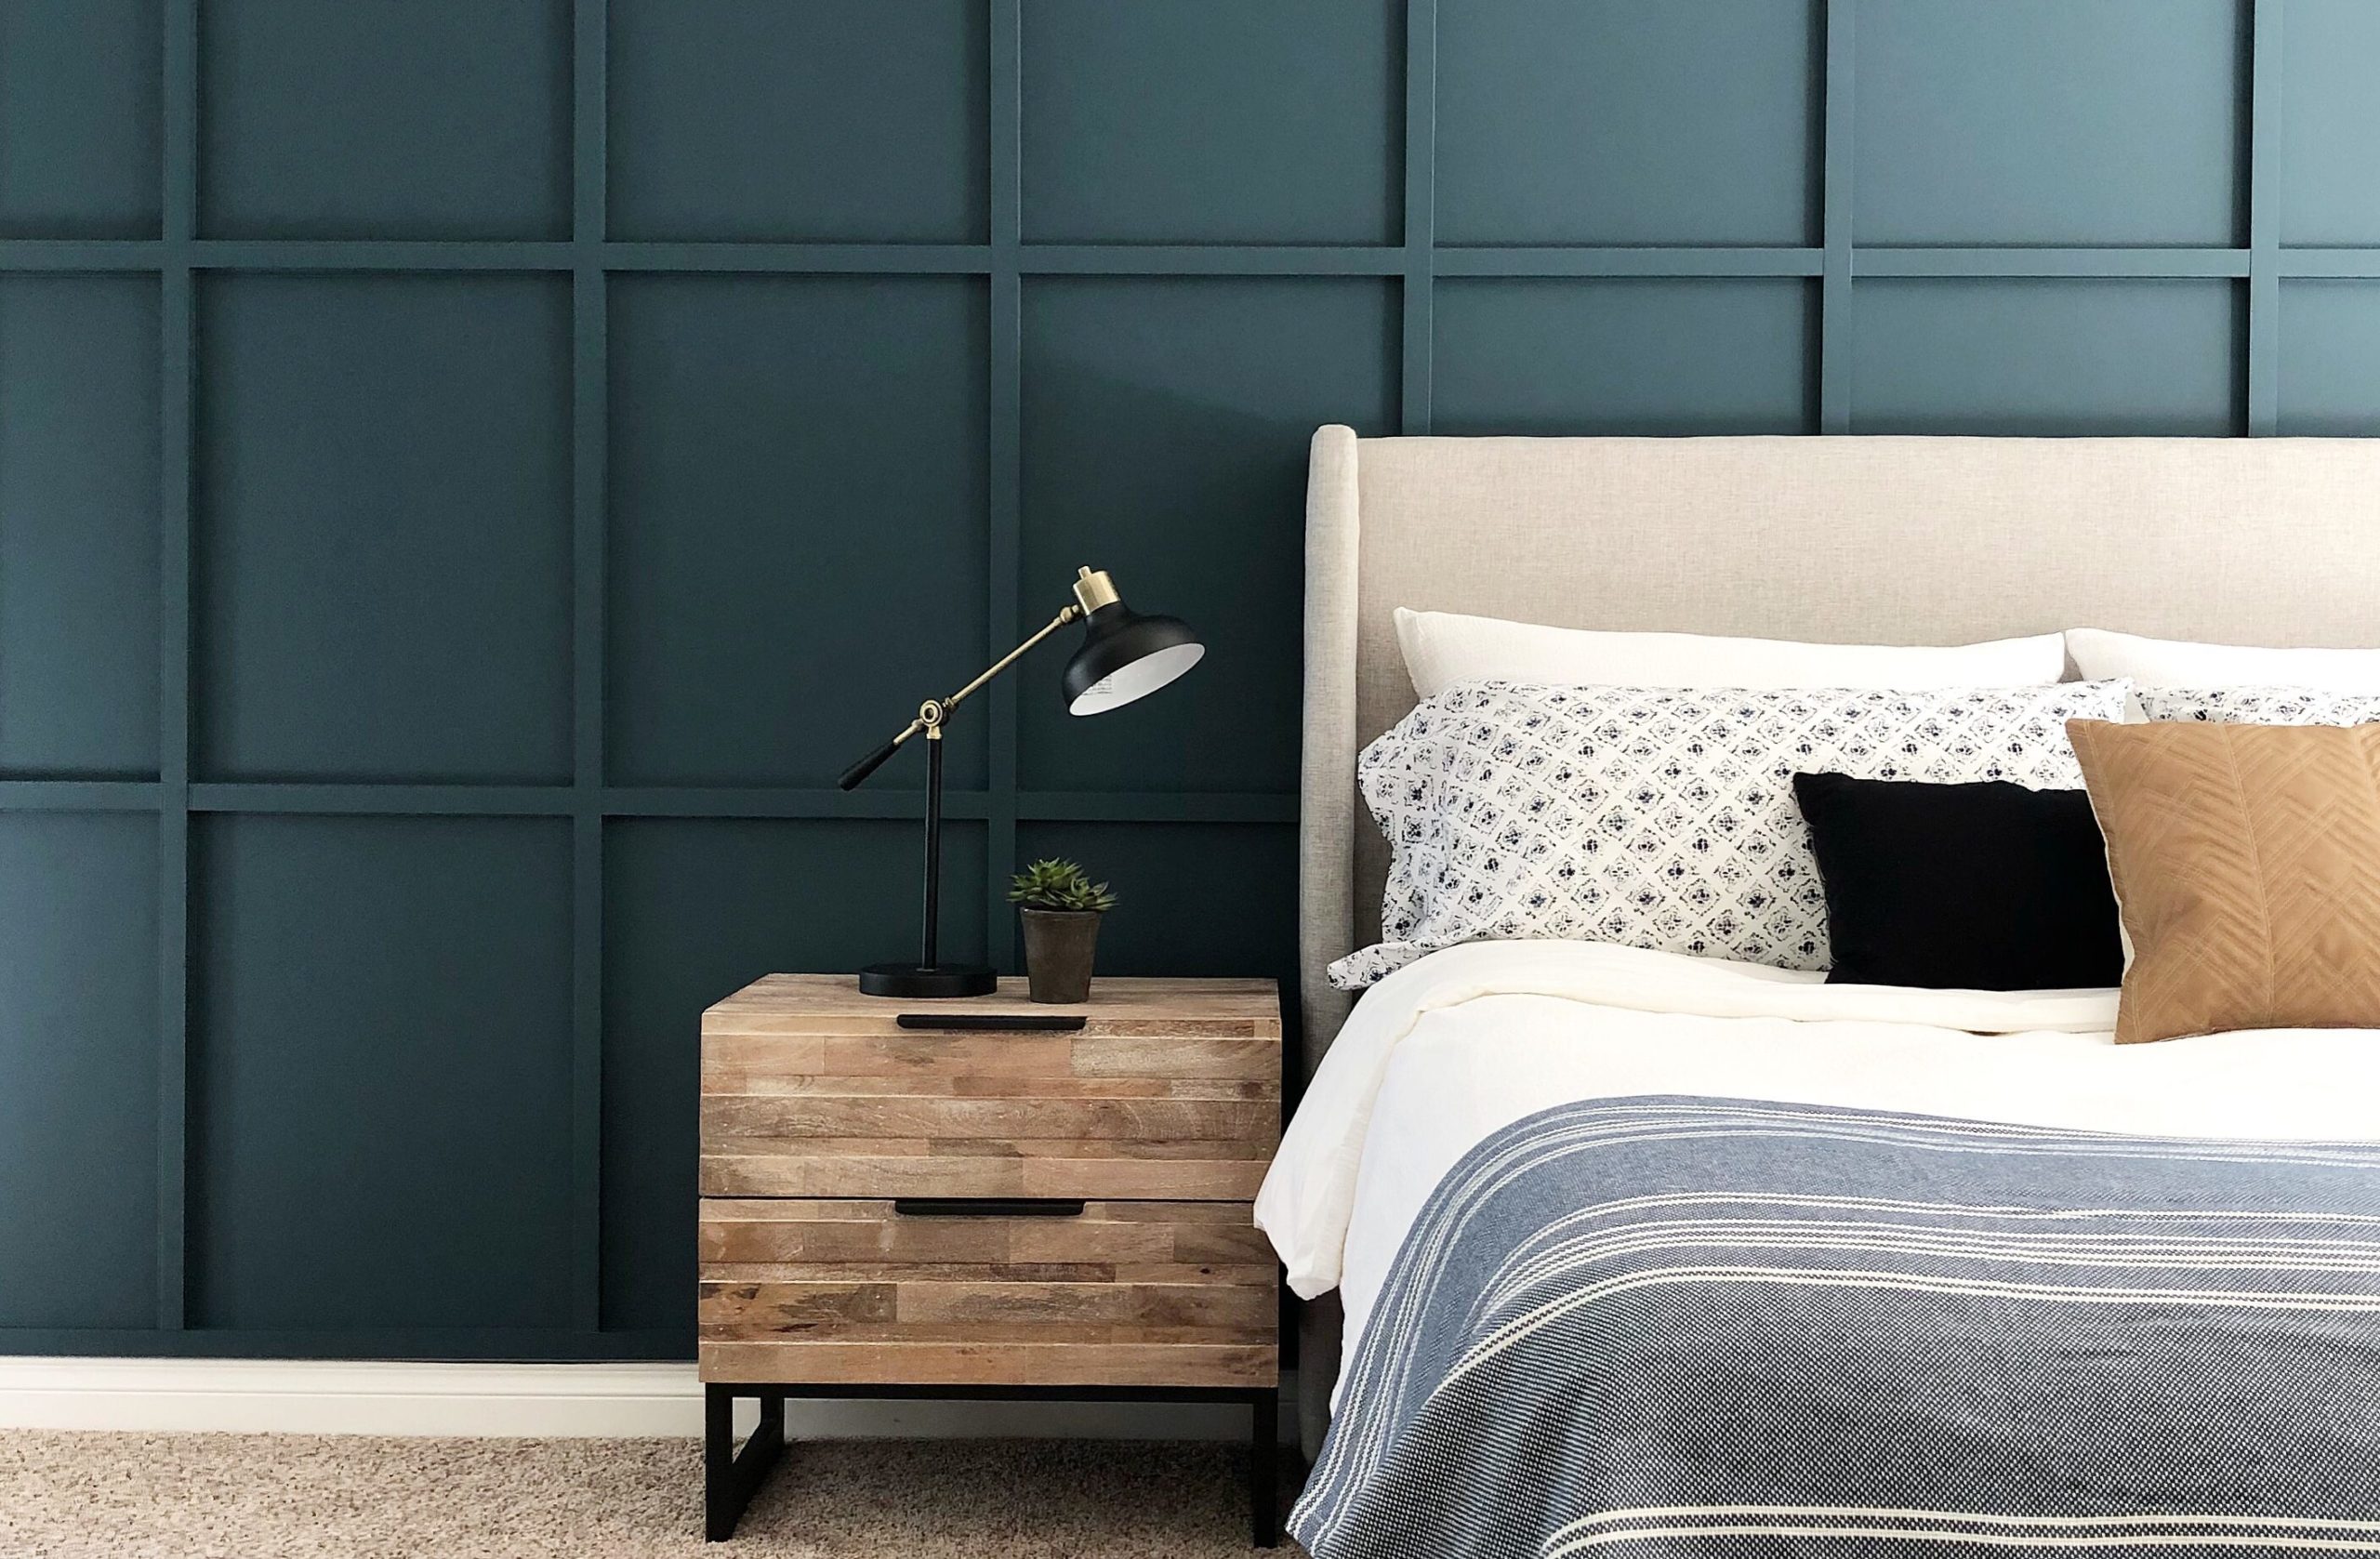 How To Diy A Board And Batten Wall Dos, How To Build A Horizontal Wall Bedroom